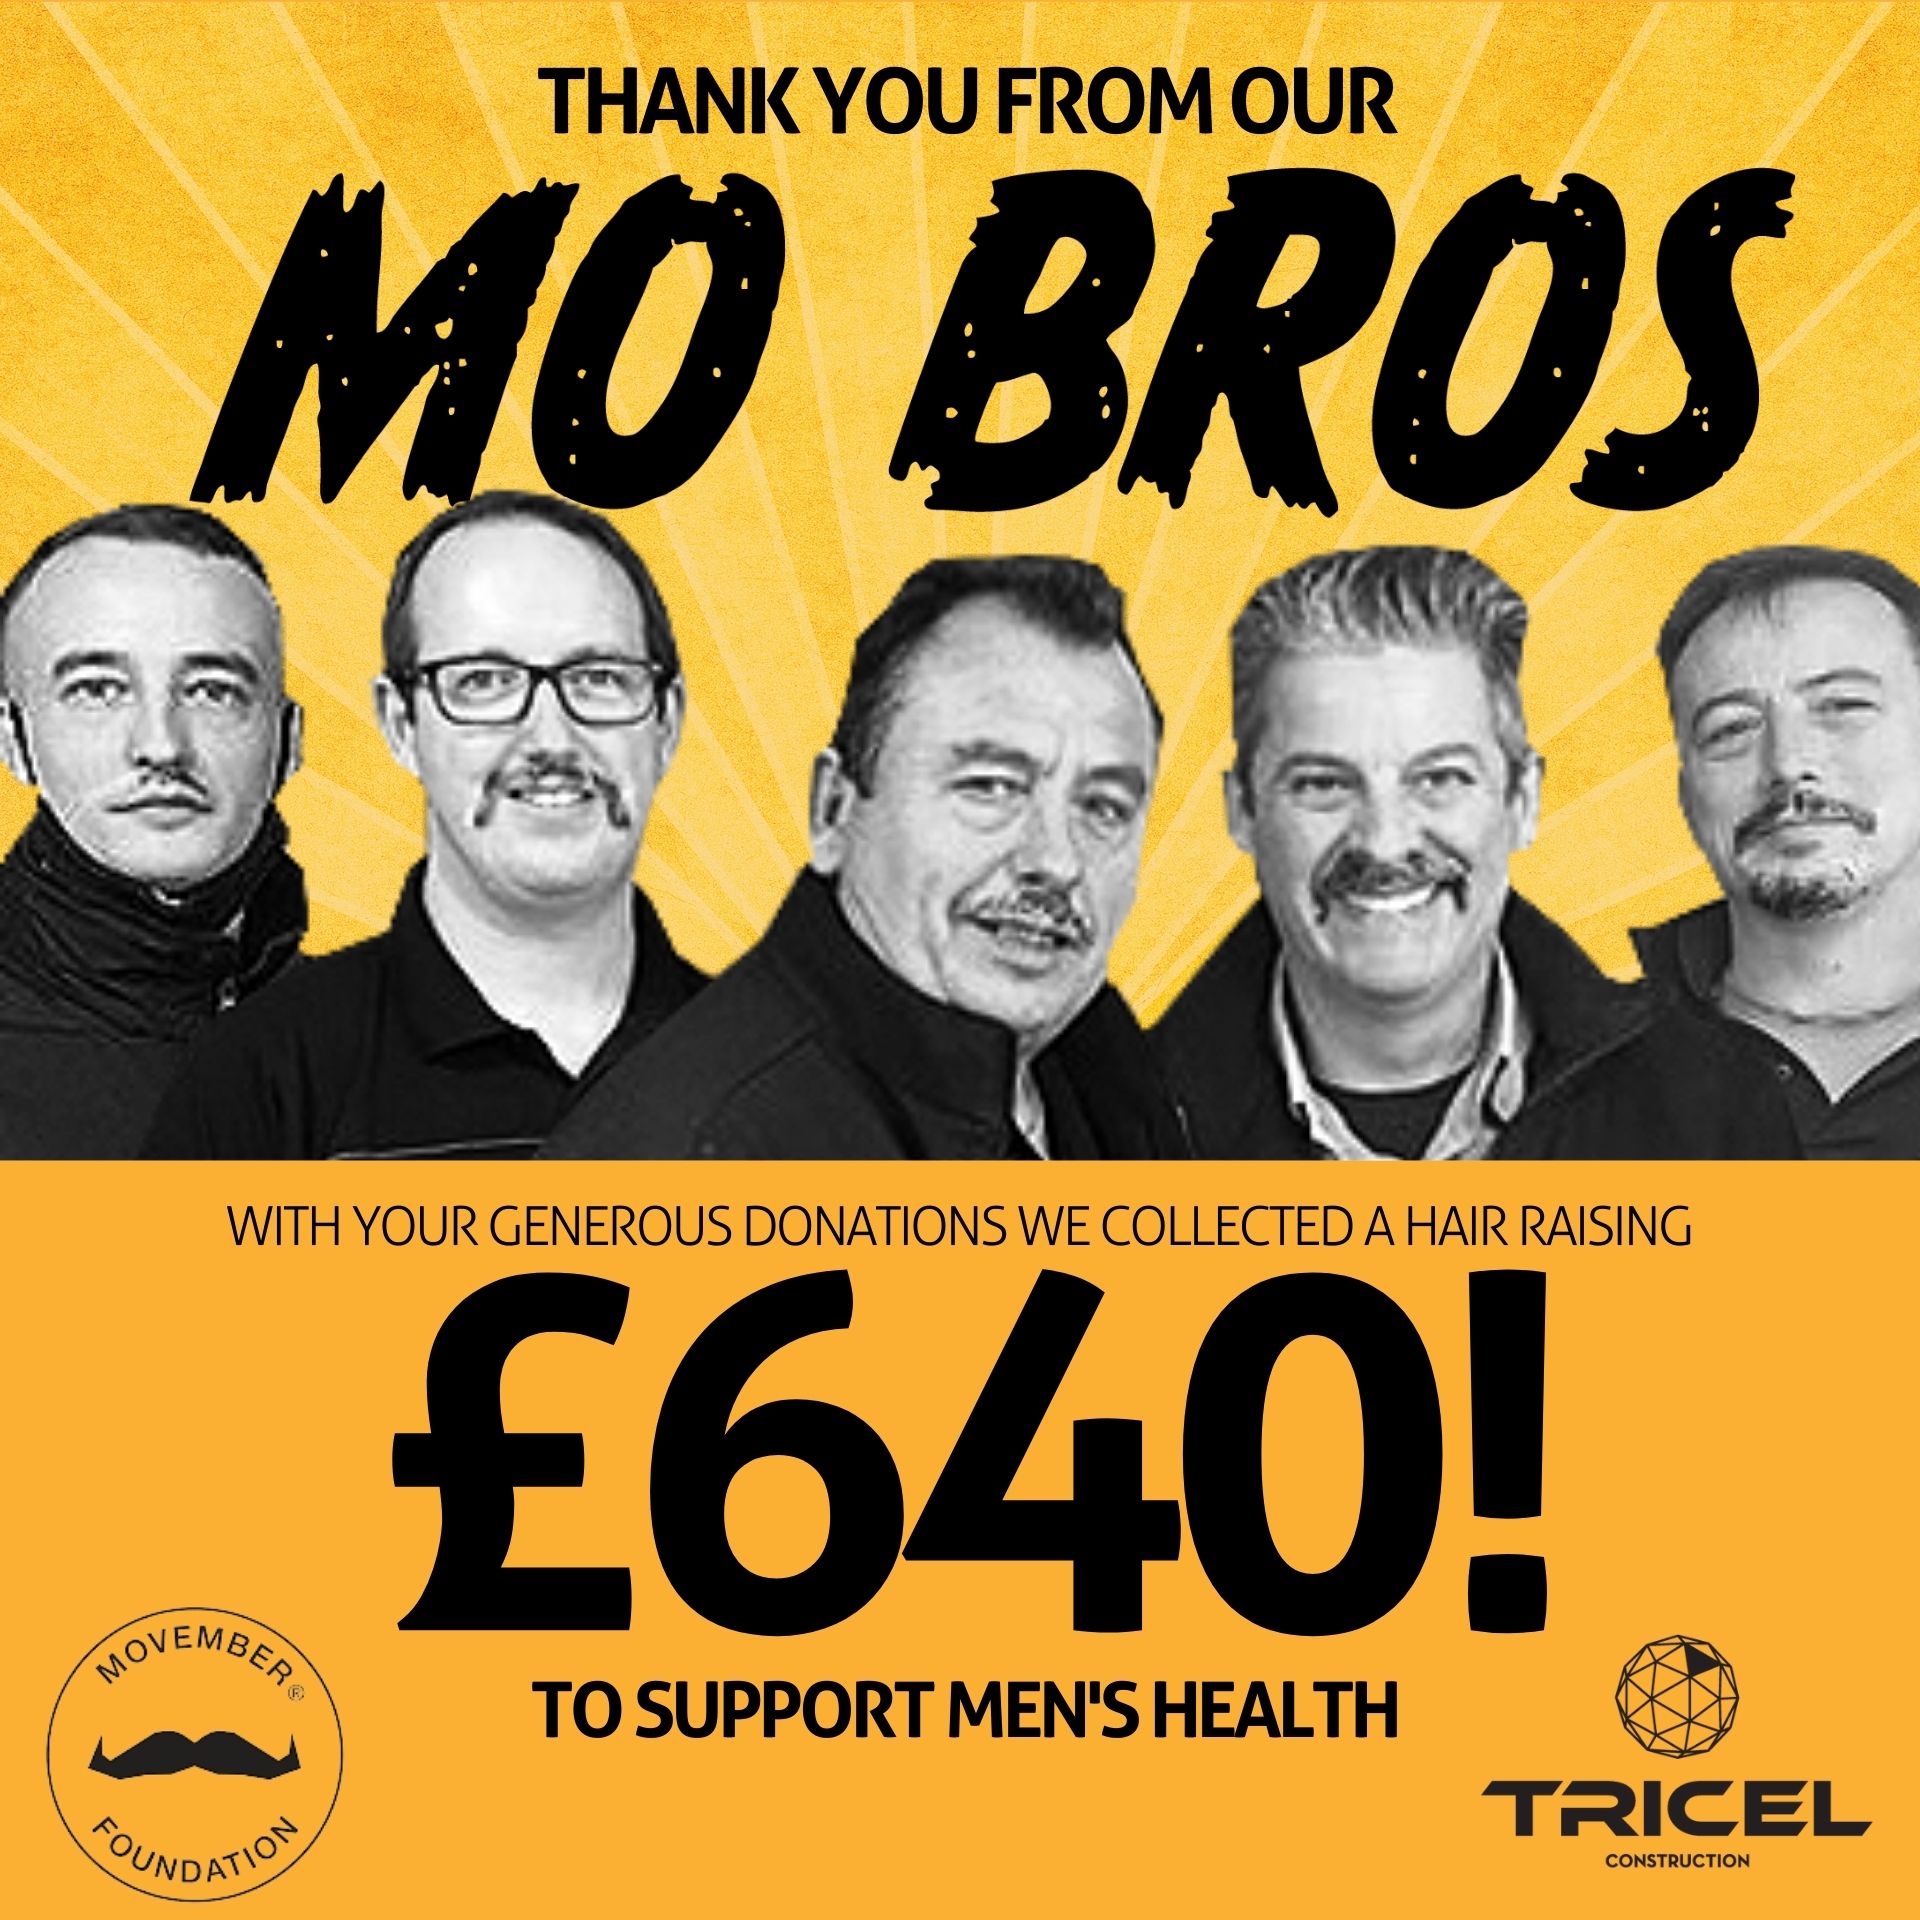 Tricel Gloucester Staff Raised £640 for Movember